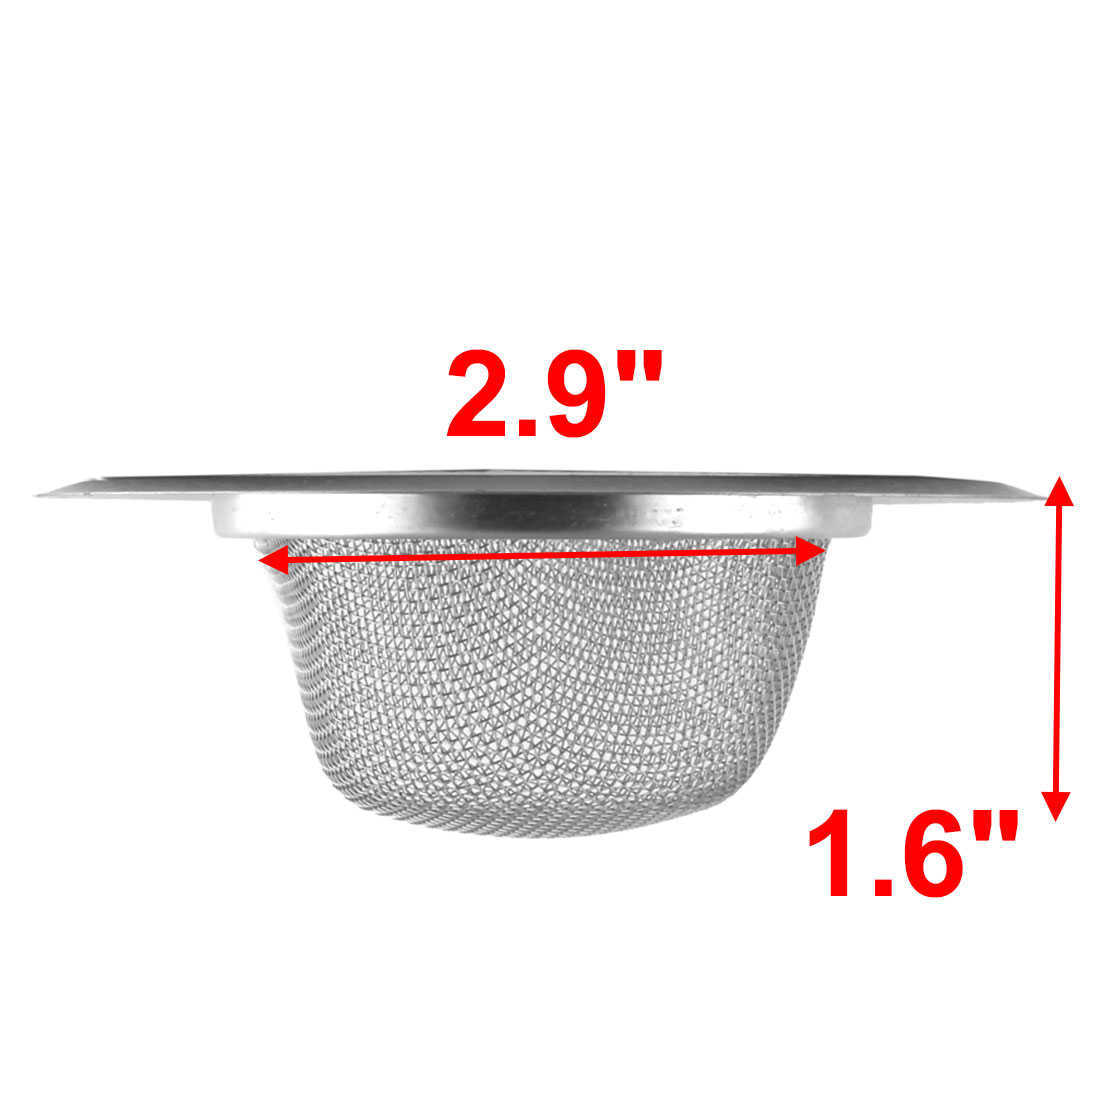 Unique Bargains Home Kitchen 4' Outer 3' Inner Basin Filter Mesh Sink Strainers